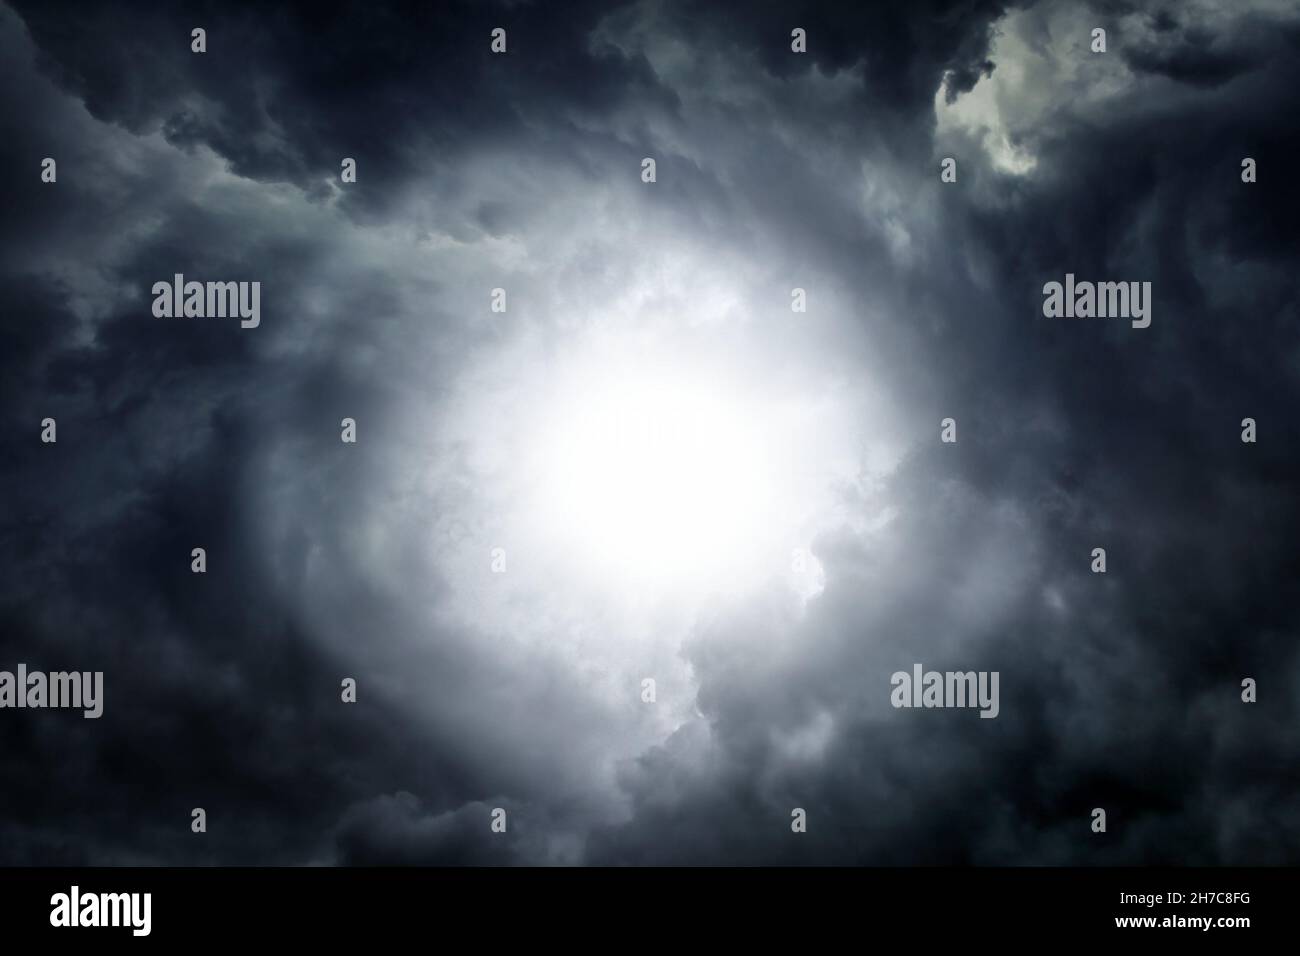 White Hole in the Dark Storm Clouds Stock Photo